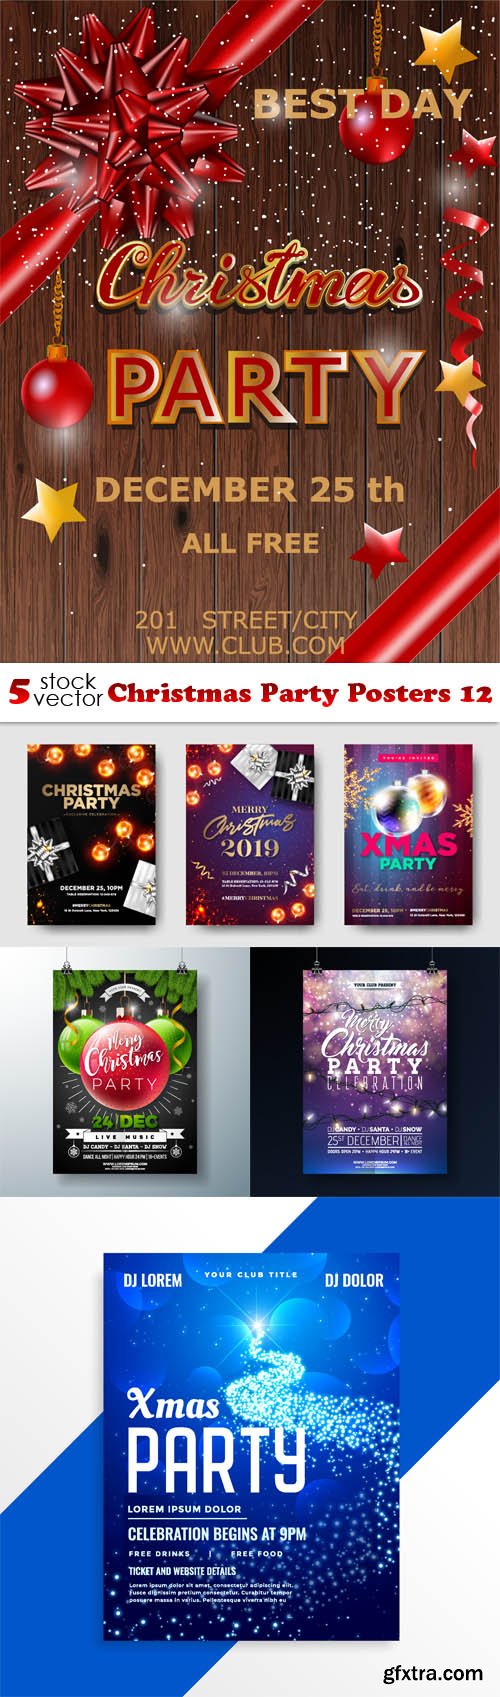 Vectors - Christmas Party Posters 12